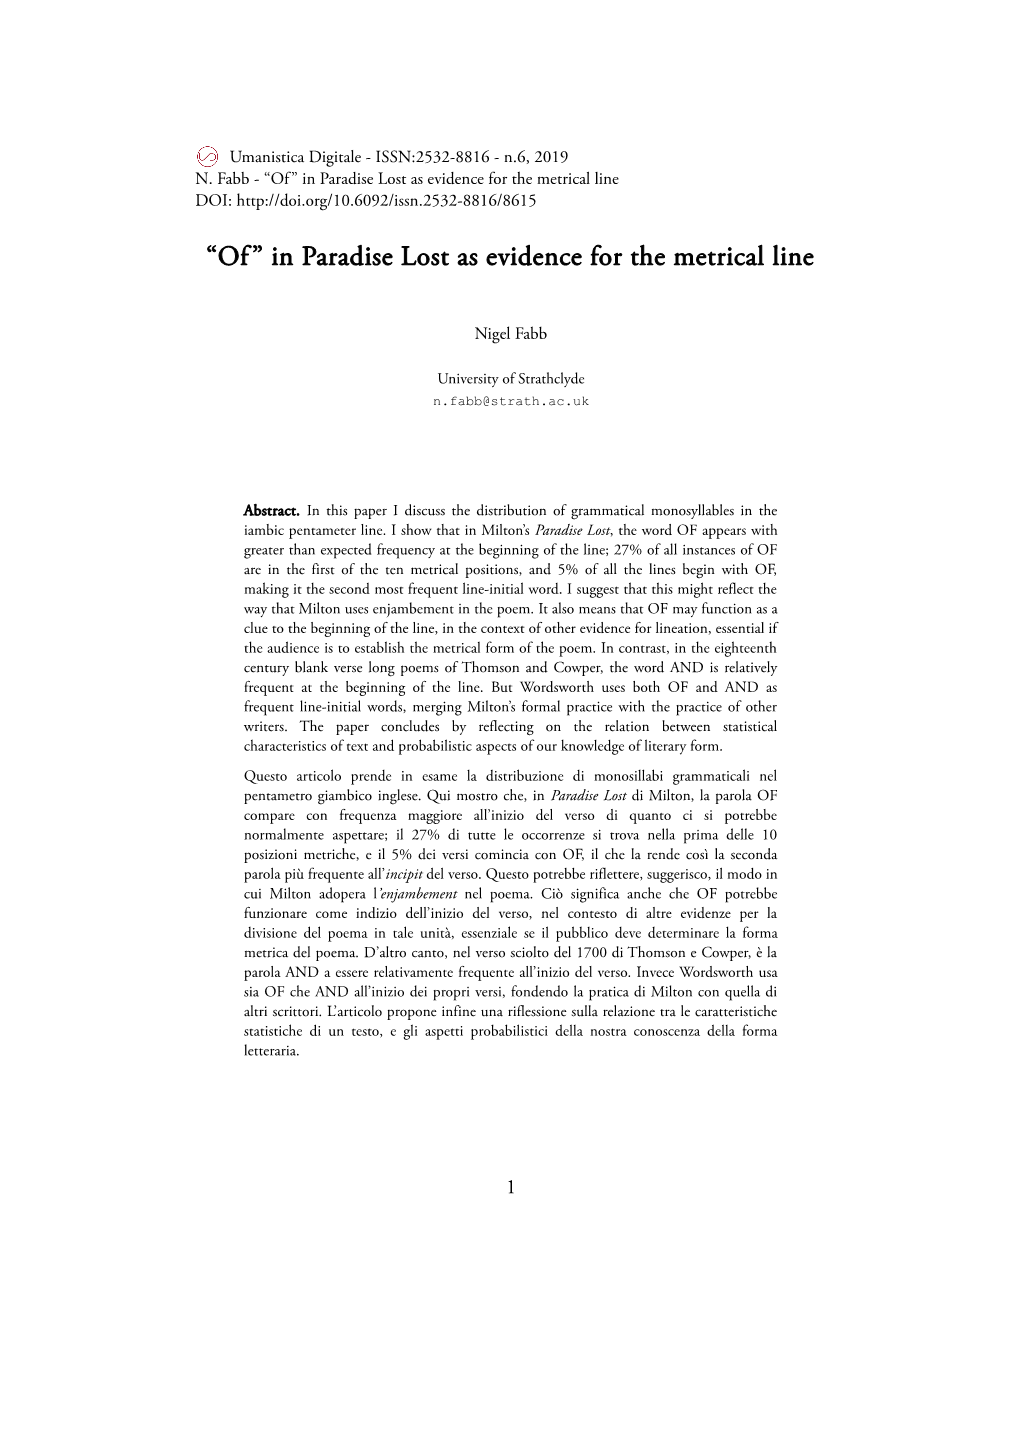 “Of” in Paradise Lost As Evidence for the Metrical Line DOI